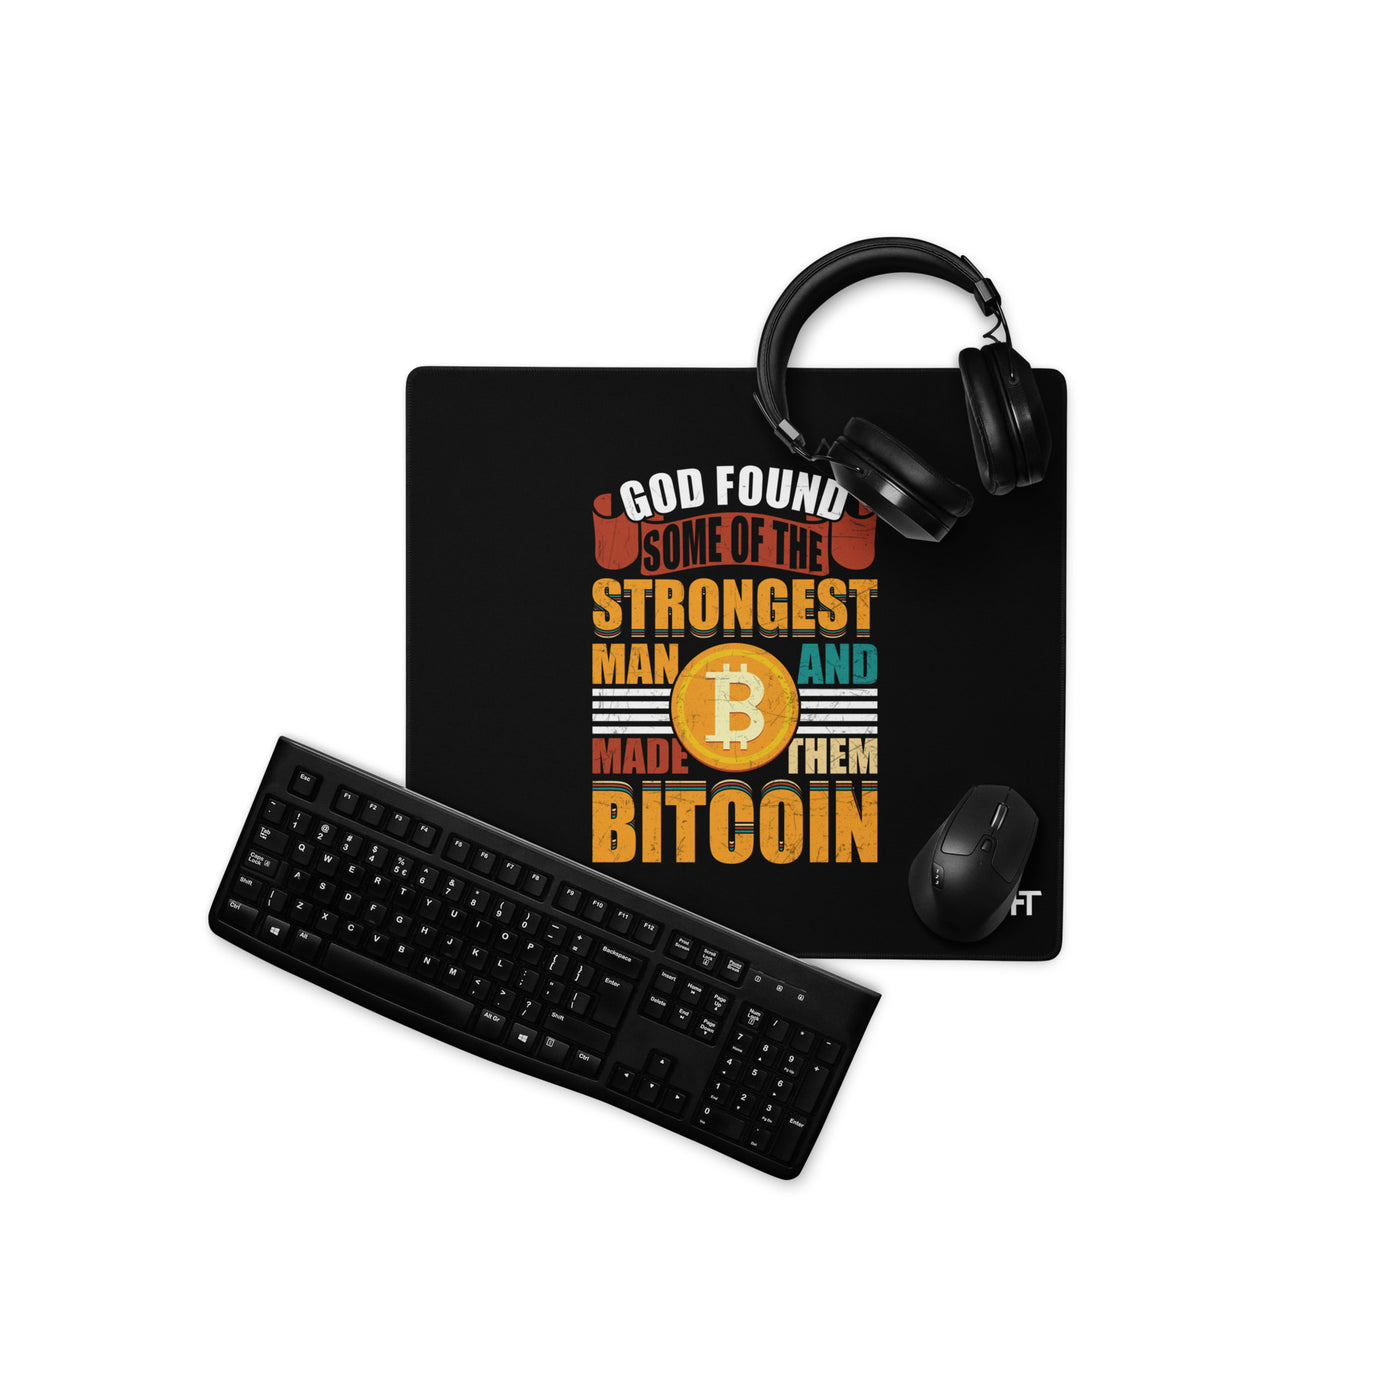 God Found Some of the Strongest Man and Made them Bitcoin - Desk Mat